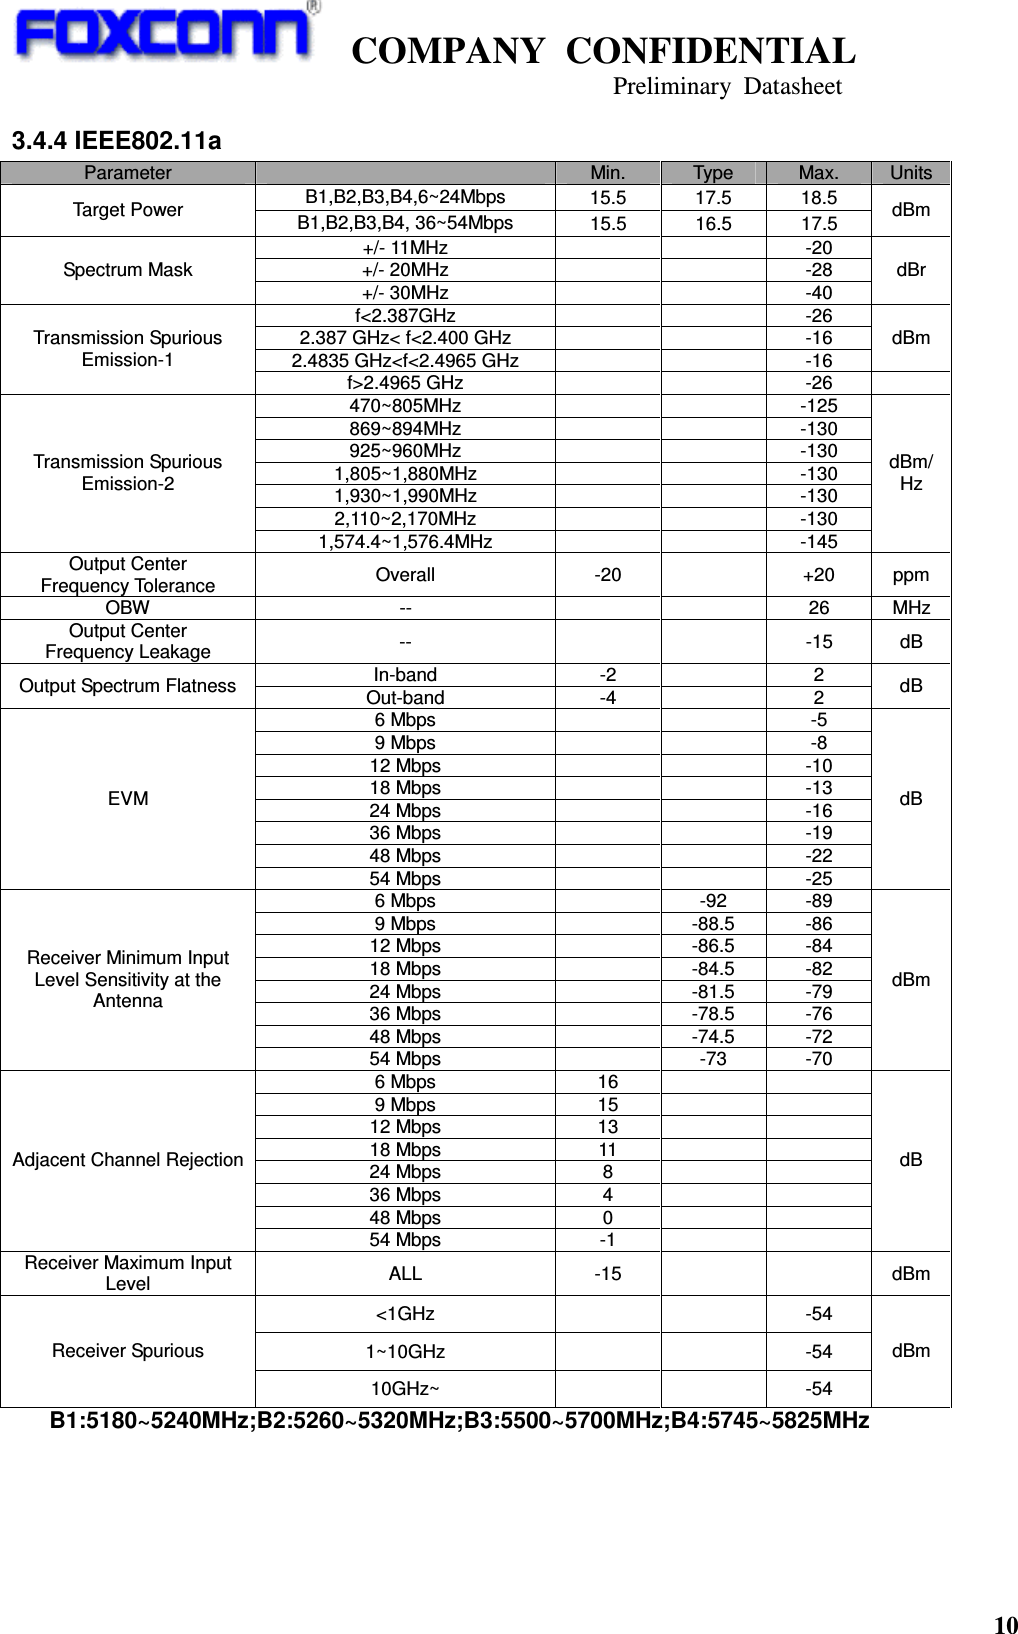    COMPANY  CONFIDENTIAL                                                                     Preliminary  Datasheet 10  3.4.4 IEEE802.11a Parameter    Min.  Type  Max.  Units B1,B2,B3,B4,6~24Mbps  15.5  17.5  18.5 Target Power  B1,B2,B3,B4, 36~54Mbps  15.5  16.5  17.5  dBm +/- 11MHz      -20 +/- 20MHz      -28 Spectrum Mask +/- 30MHz      -40 dBr f&lt;2.387GHz      -26 2.387 GHz&lt; f&lt;2.400 GHz      -16 2.4835 GHz&lt;f&lt;2.4965 GHz      -16 dBm Transmission Spurious Emission-1 f&gt;2.4965 GHz      -26   470~805MHz      -125 869~894MHz      -130 925~960MHz      -130 1,805~1,880MHz      -130 1,930~1,990MHz      -130 2,110~2,170MHz      -130 Transmission Spurious Emission-2 1,574.4~1,576.4MHz      -145 dBm/ Hz Output Center Frequency Tolerance  Overall  -20    +20  ppm OBW  --      26  MHz Output Center Frequency Leakage  --      -15  dB In-band  -2    2 Output Spectrum Flatness  Out-band  -4    2  dB 6 Mbps      -5 9 Mbps      -8 12 Mbps      -10 18 Mbps      -13 24 Mbps      -16 36 Mbps      -19 48 Mbps      -22 EVM 54 Mbps      -25 dB 6 Mbps    -92  -89 9 Mbps    -88.5  -86 12 Mbps    -86.5  -84 18 Mbps    -84.5  -82 24 Mbps    -81.5  -79 36 Mbps    -78.5  -76 48 Mbps    -74.5  -72 Receiver Minimum Input Level Sensitivity at the Antenna 54 Mbps    -73  -70 dBm 6 Mbps  16     9 Mbps  15     12 Mbps  13     18 Mbps  11     24 Mbps  8     36 Mbps  4     48 Mbps  0     Adjacent Channel Rejection 54 Mbps  -1     dB Receiver Maximum Input Level  ALL  -15      dBm &lt;1GHz      -54 1~10GHz      -54 Receiver Spurious 10GHz~      -54 dBm B1:5180~5240MHz;B2:5260~5320MHz;B3:5500~5700MHz;B4:5745~5825MHz   